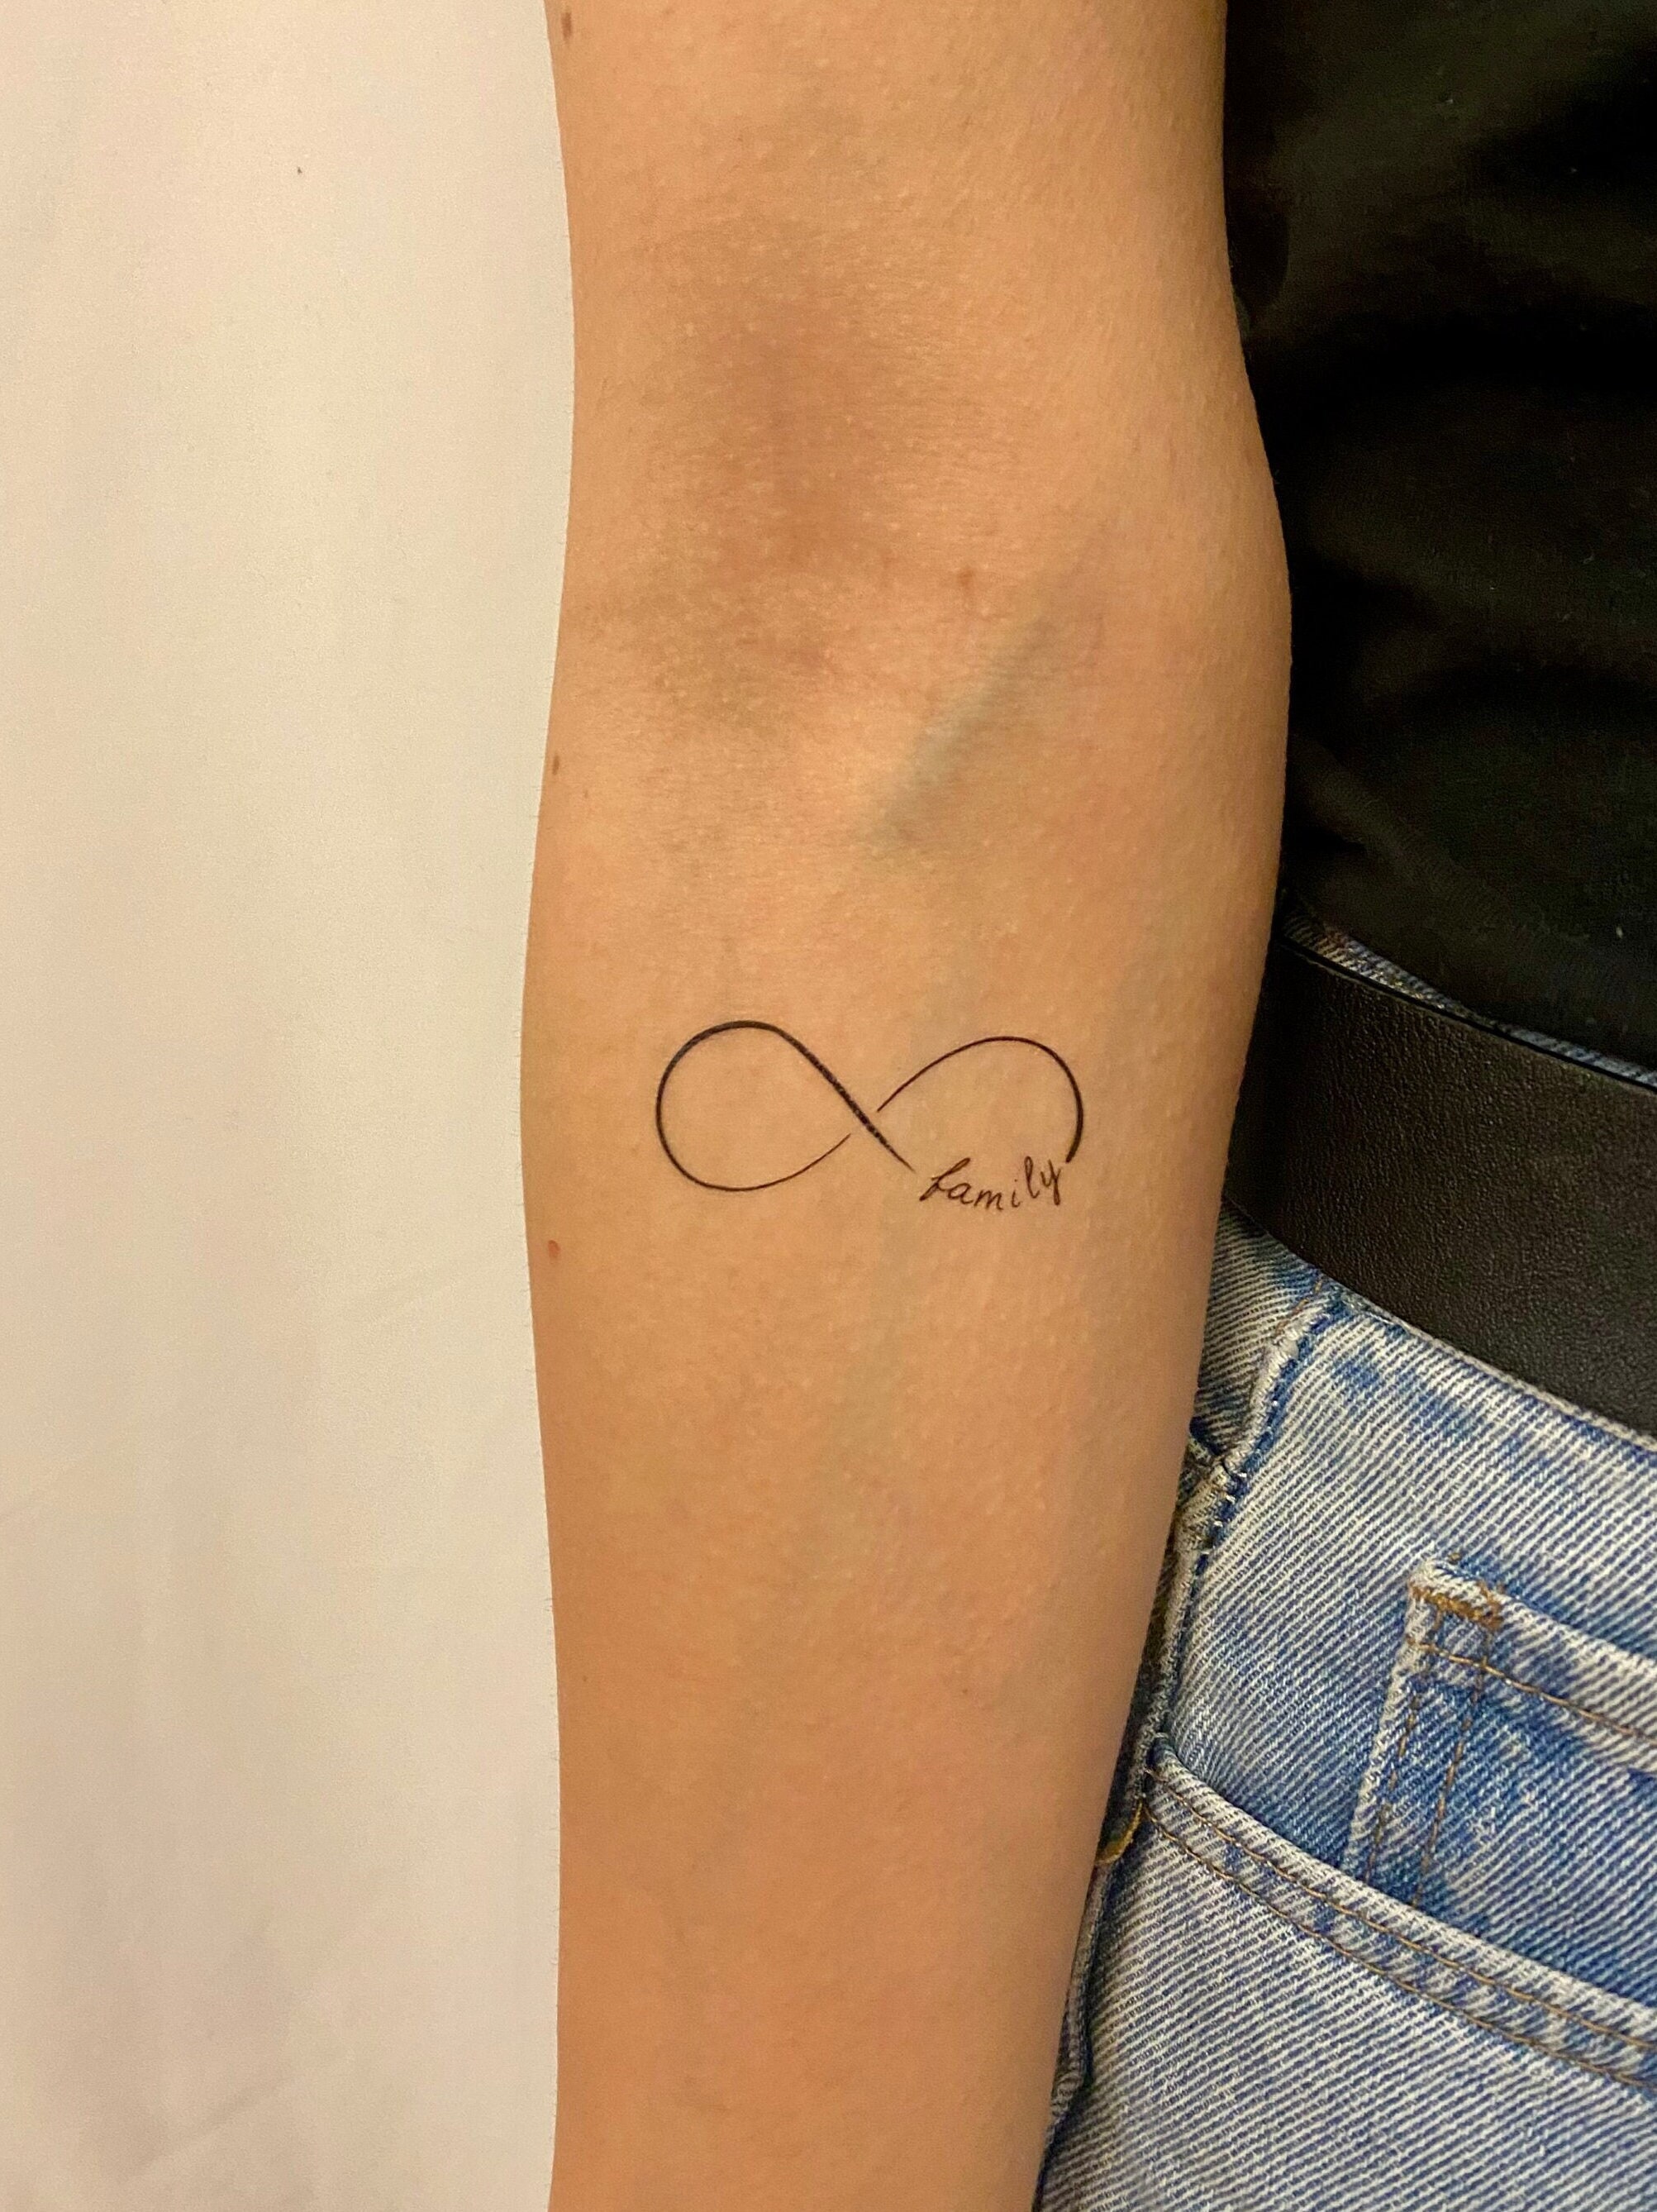 100+ Most Stunning Infinity Tattoo Ideas | Ankle tattoo designs, Small infinity  tattoos, Infinity tattoo designs